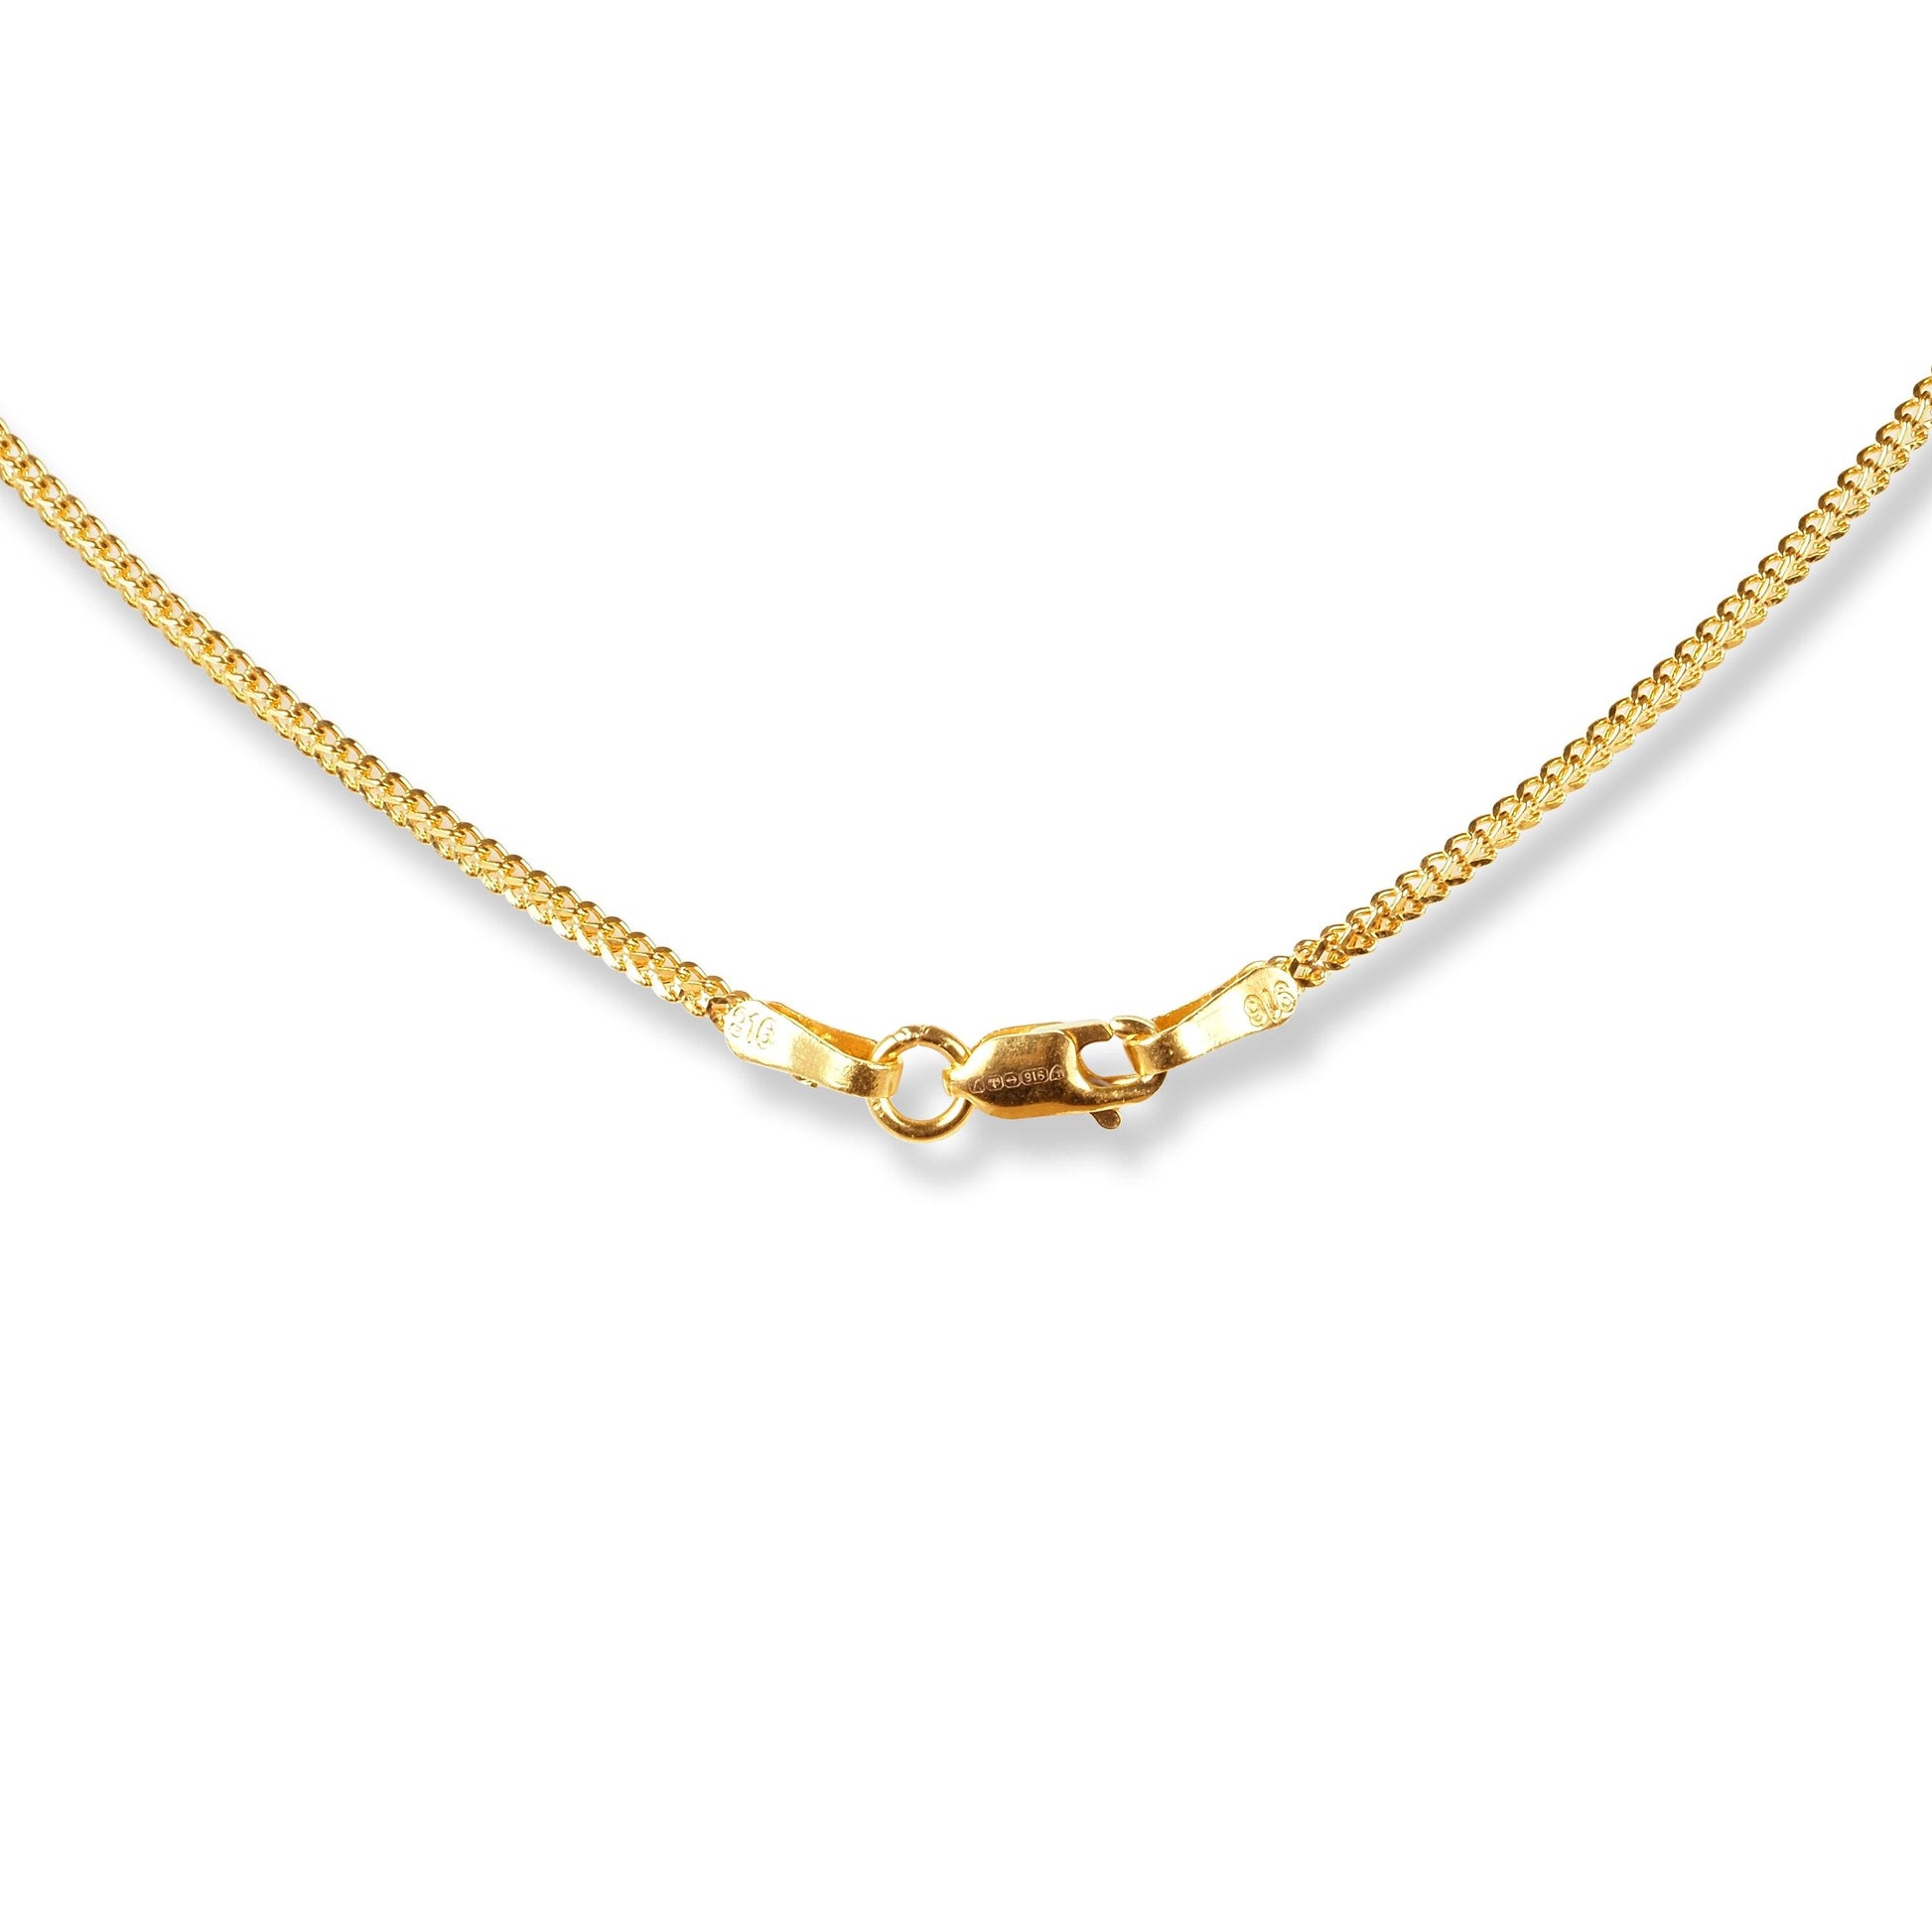 22ct Gold Box Chain With Sandblasted Beads and Lobster Clasp C-7147 - Minar Jewellers